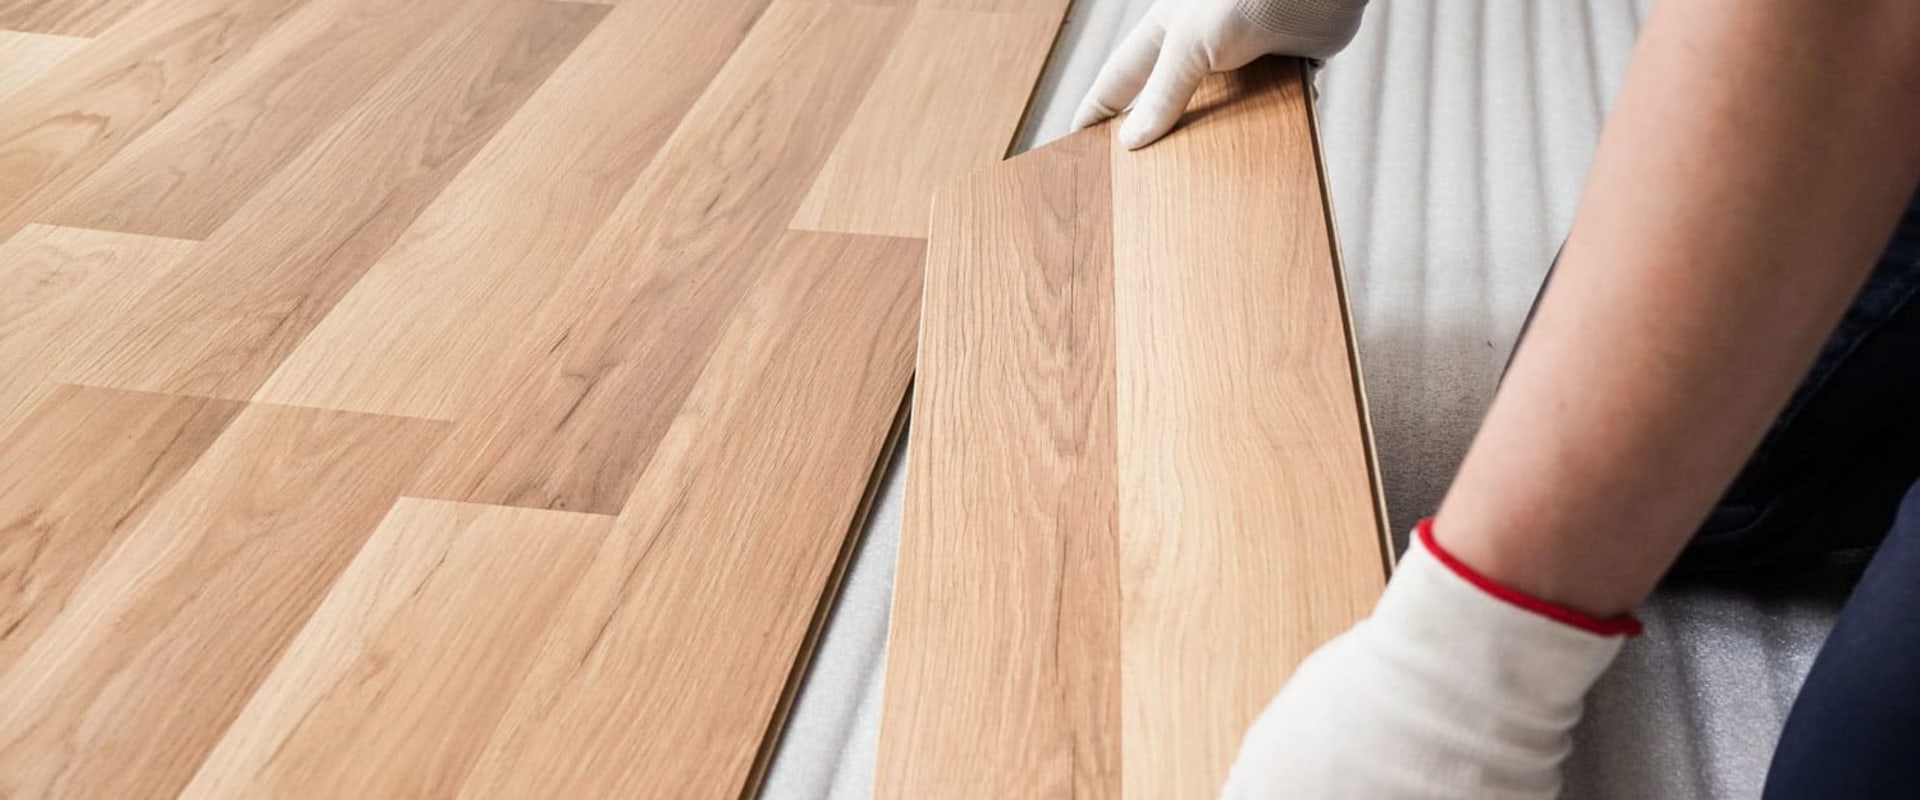 What is the Most Durable Flooring Option for Your Home?